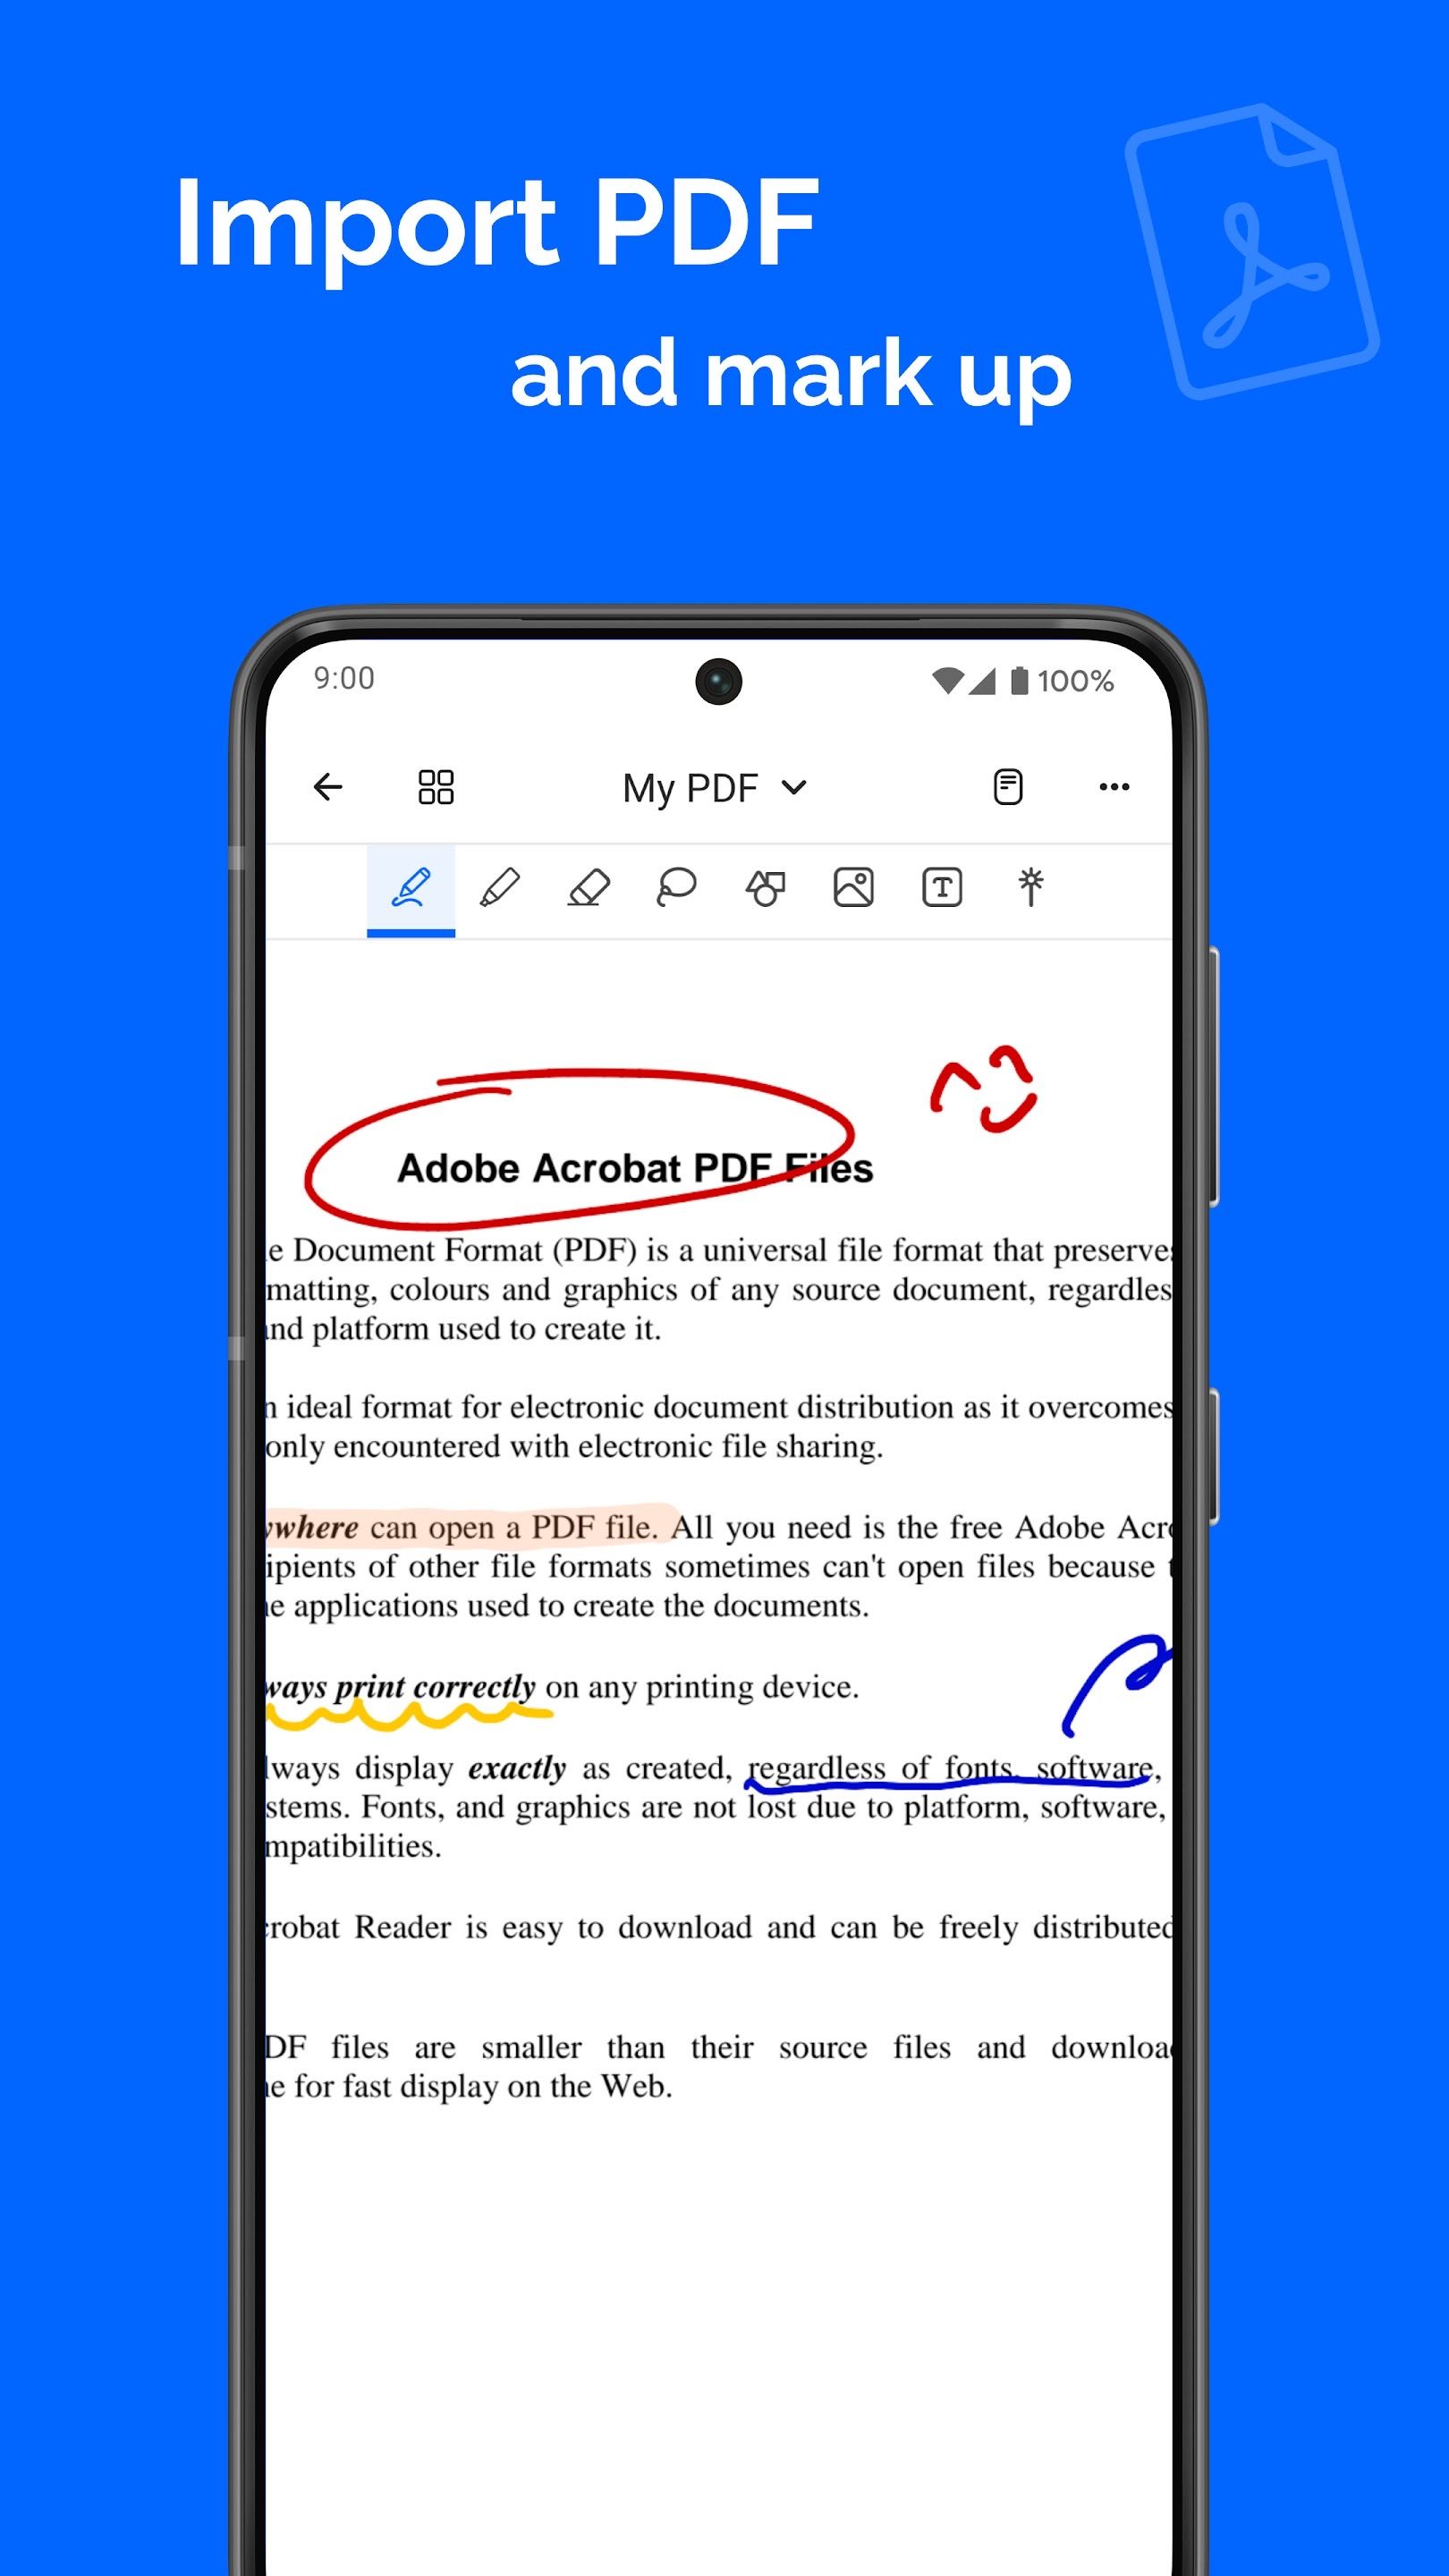 best-utility-apps-on-android-notewise-import-pdf